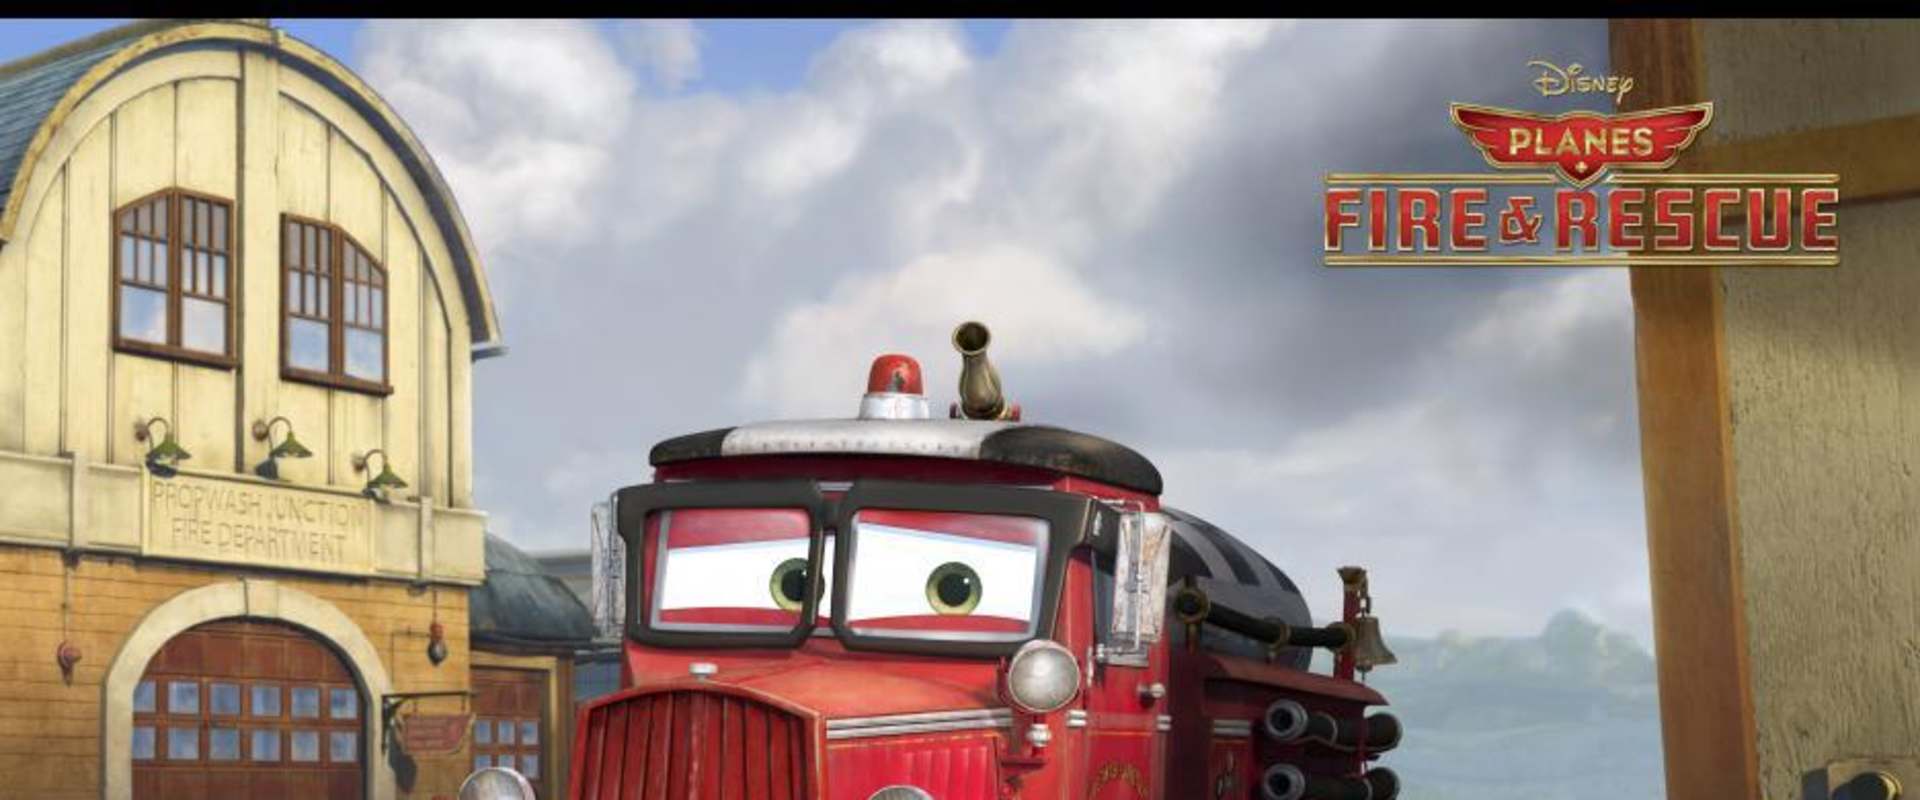 Planes: Fire & Rescue background 1